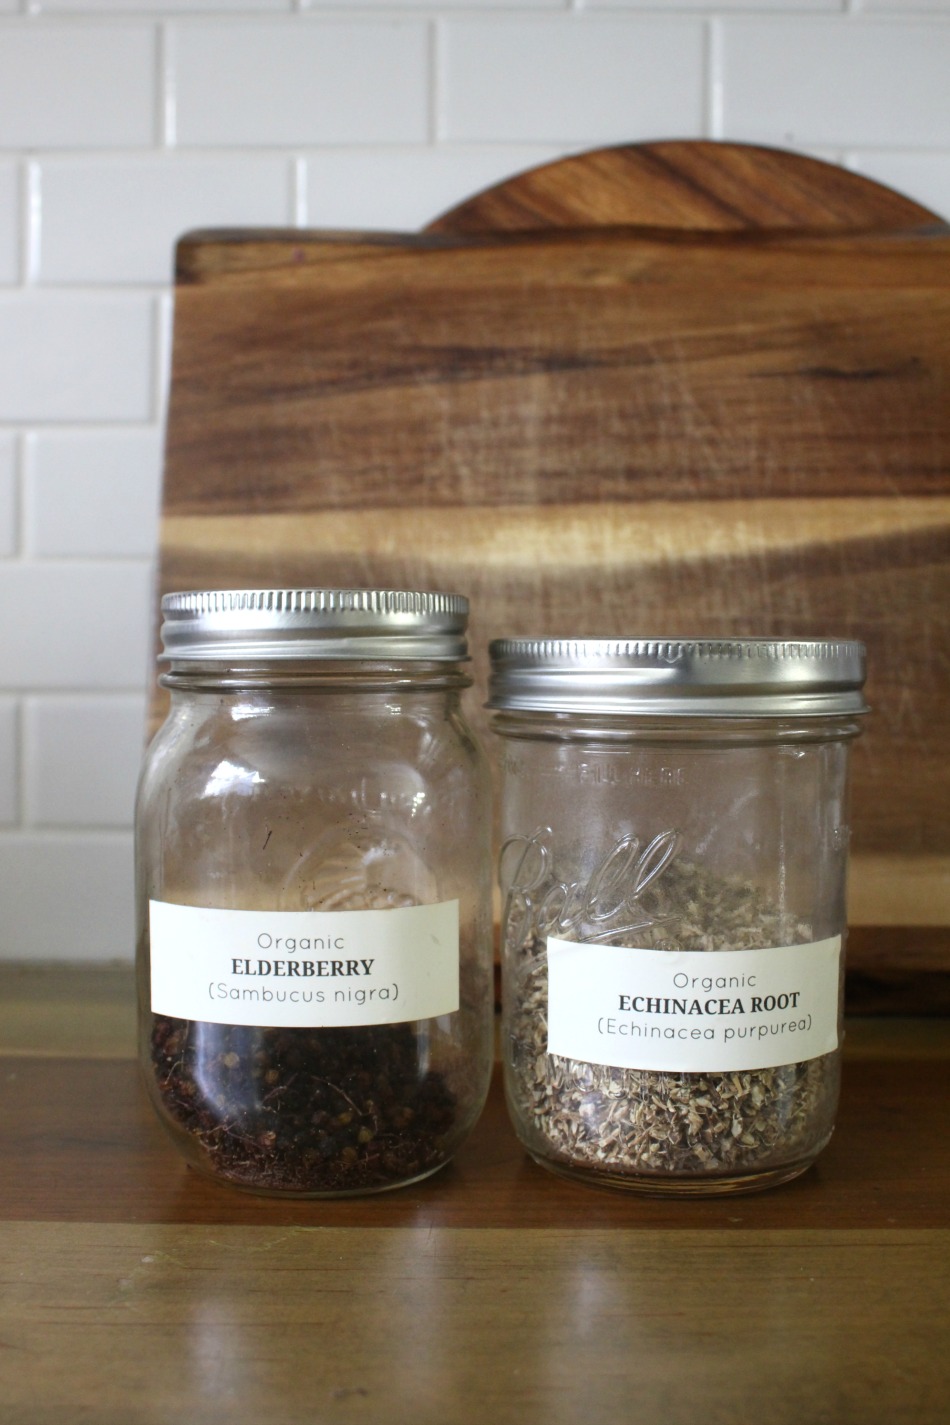 Echinacea Versus Elderberry For Cold & Flu Season | Growing Up Herbal | Learn more about echinacea versus elderberry — how they compare in action and how to use them as preventatives during cold and flu season.